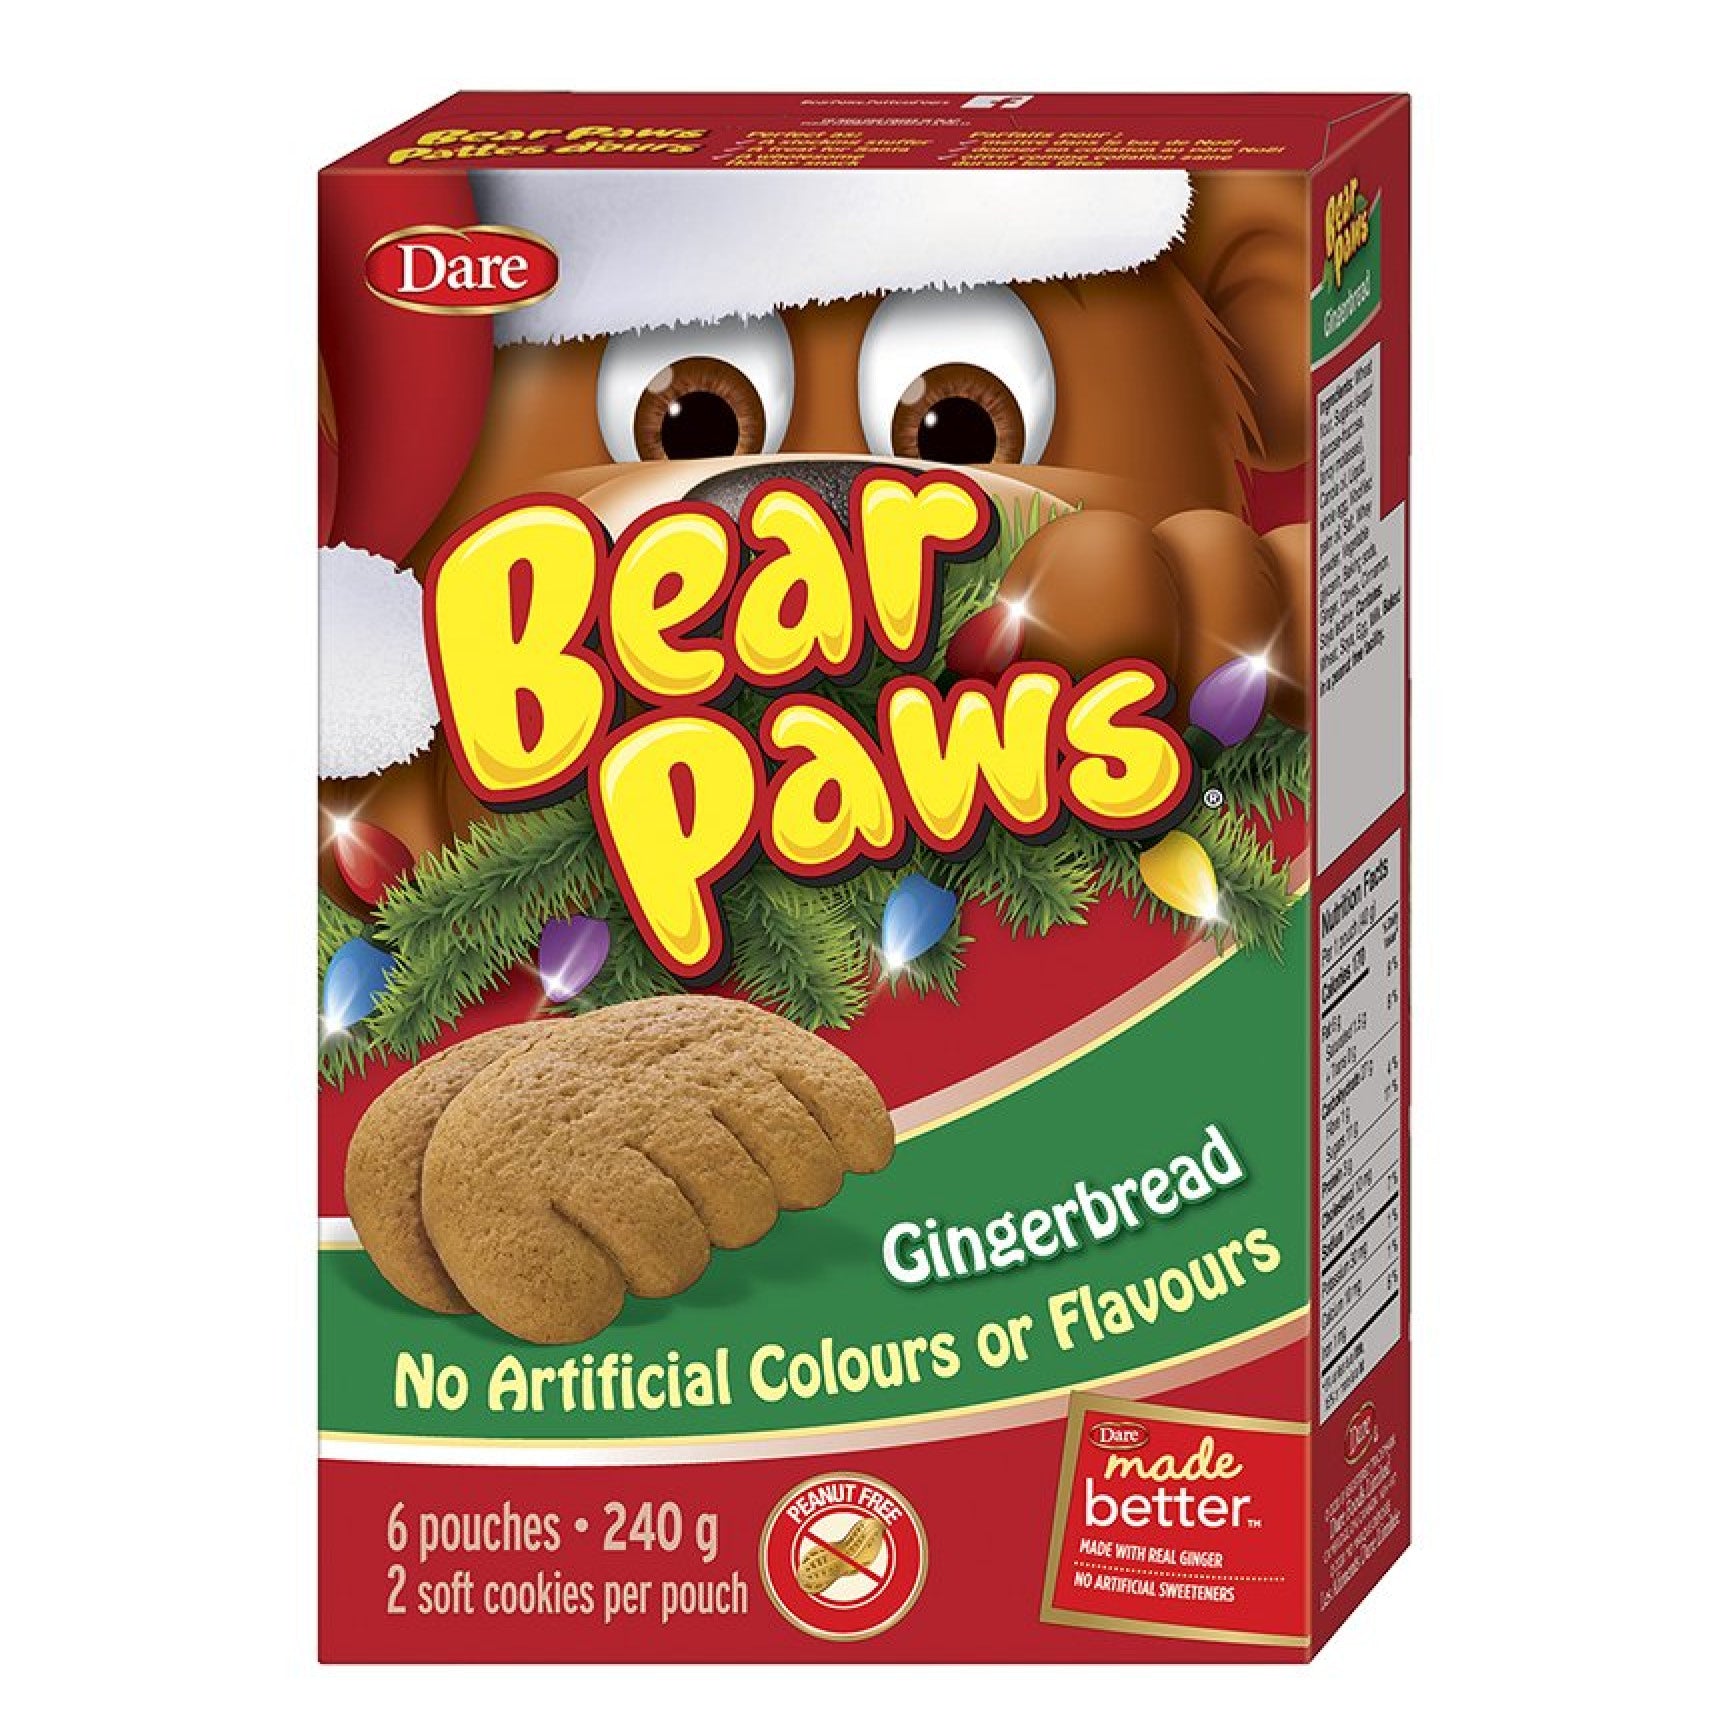 Dare Bear Paws Gingerbread Cookies, 240g